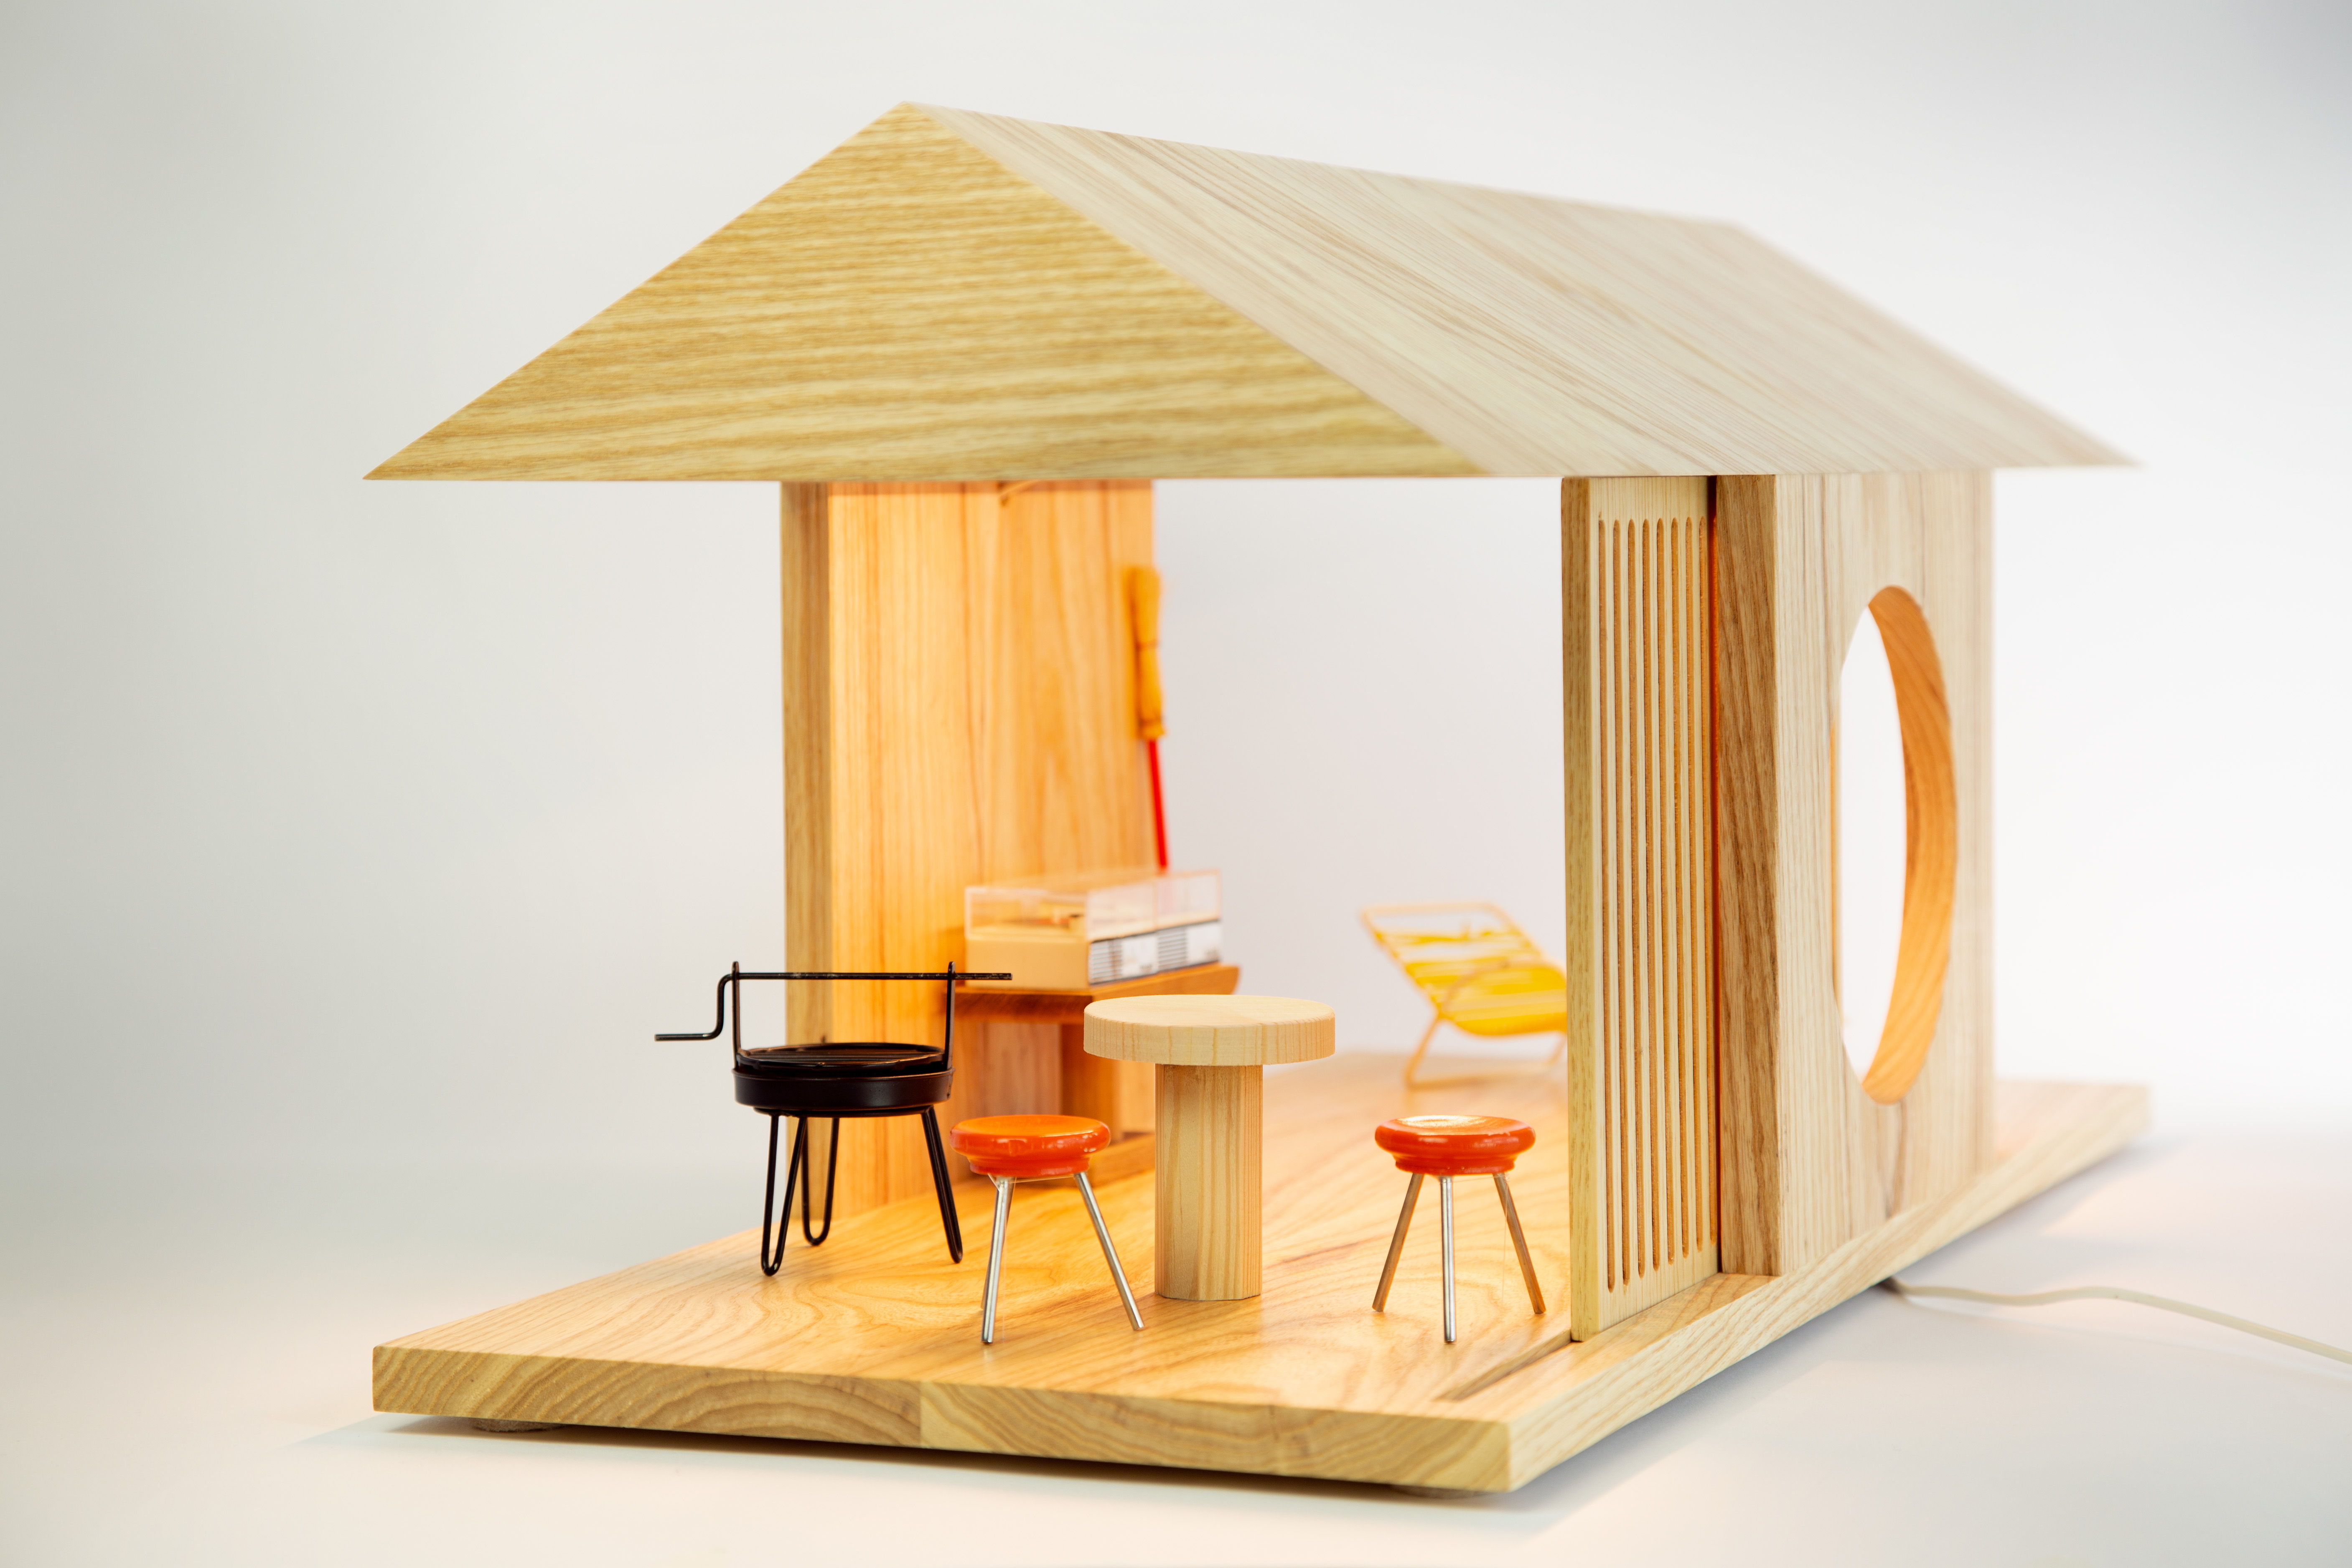 Doll’s House by Studiomama and Doll’s House Furniture, part of R for Repair 2022. Image by Zuketa Film Production